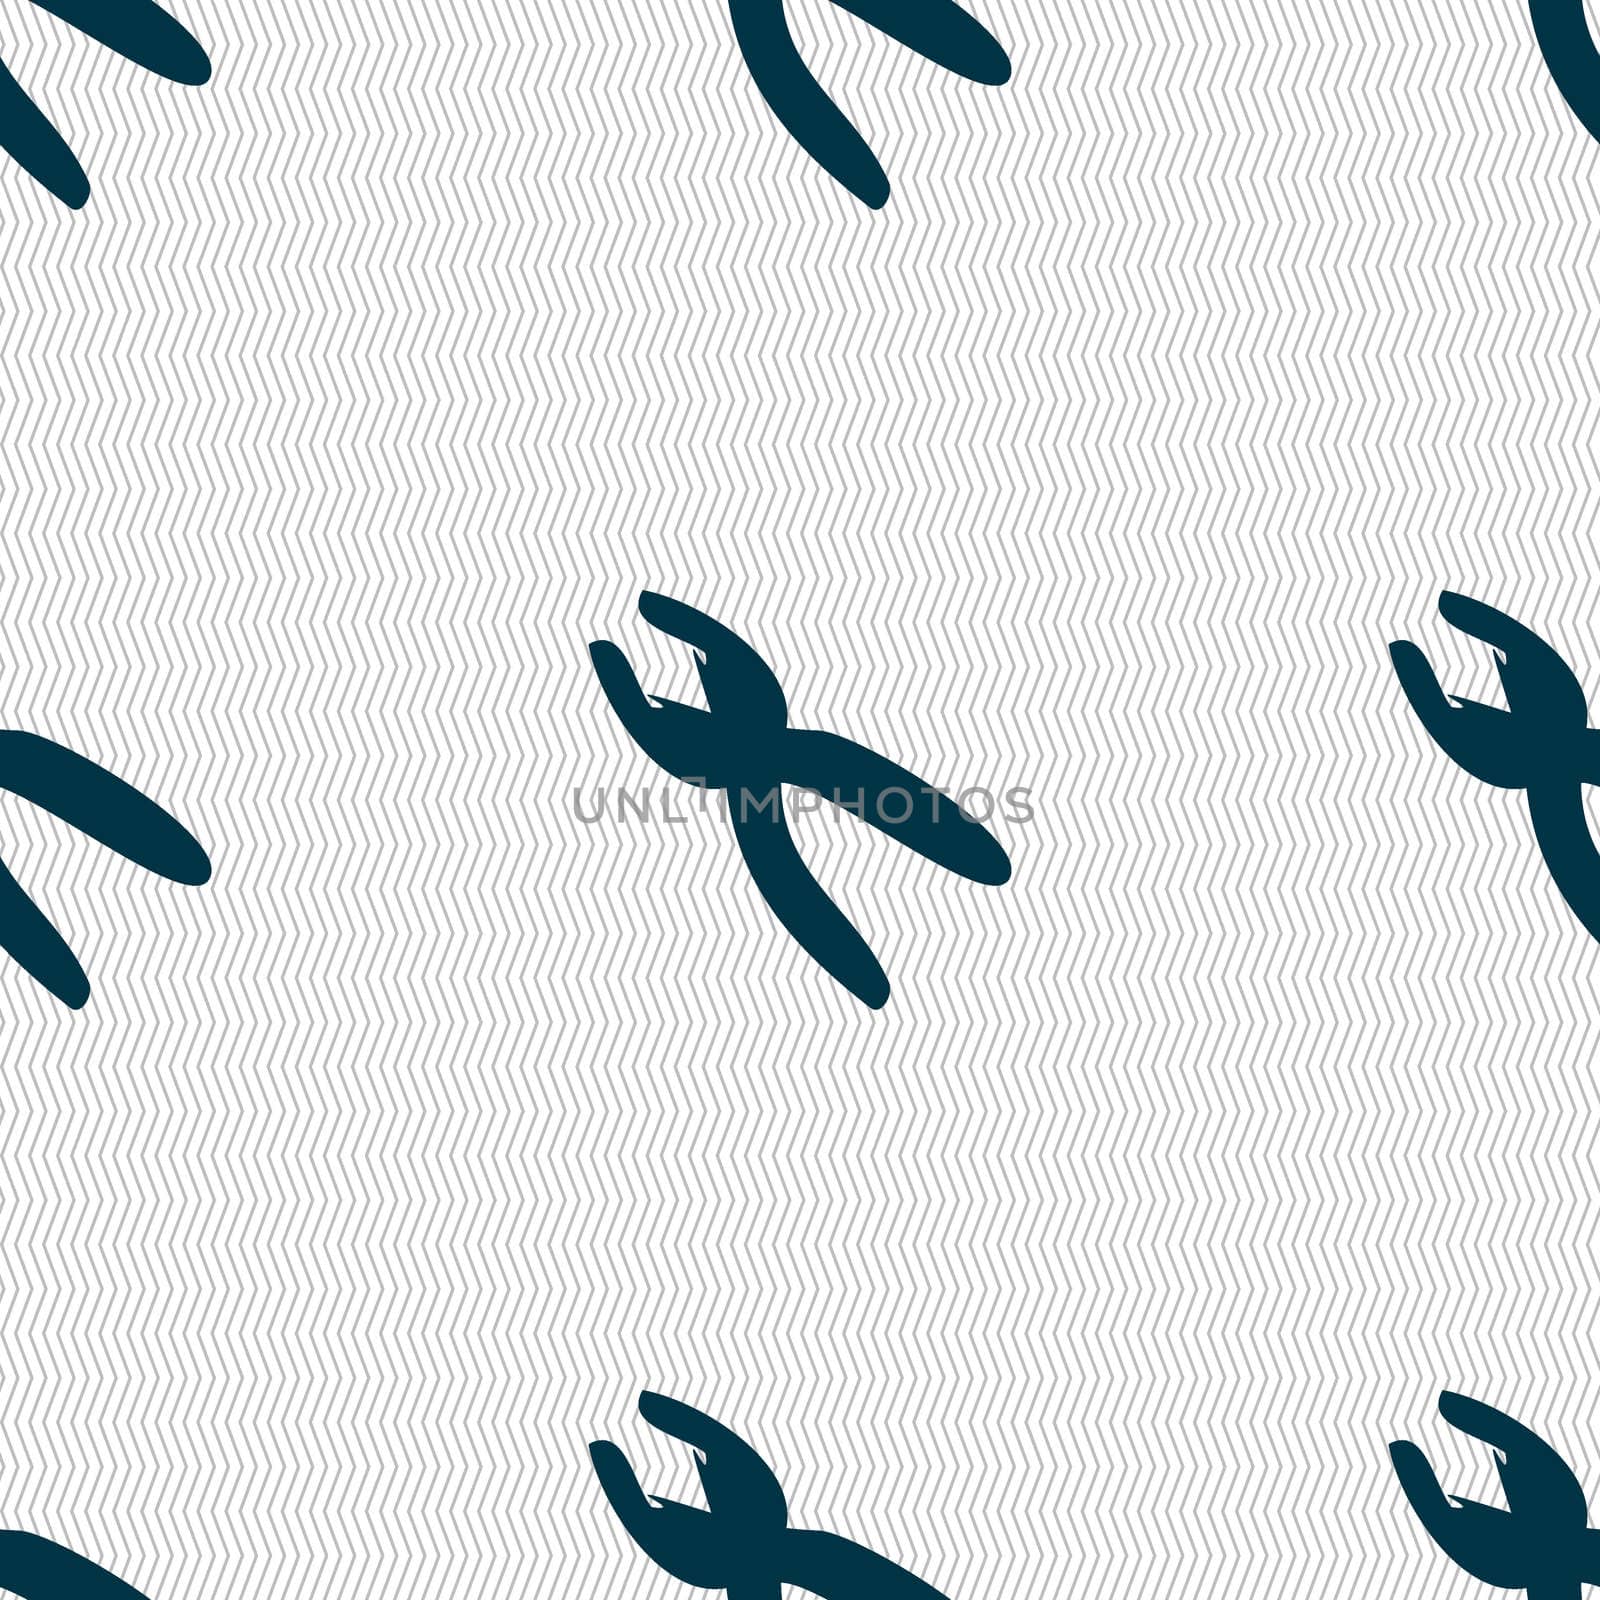 pliers icon sign. Seamless abstract background with geometric shapes. illustration